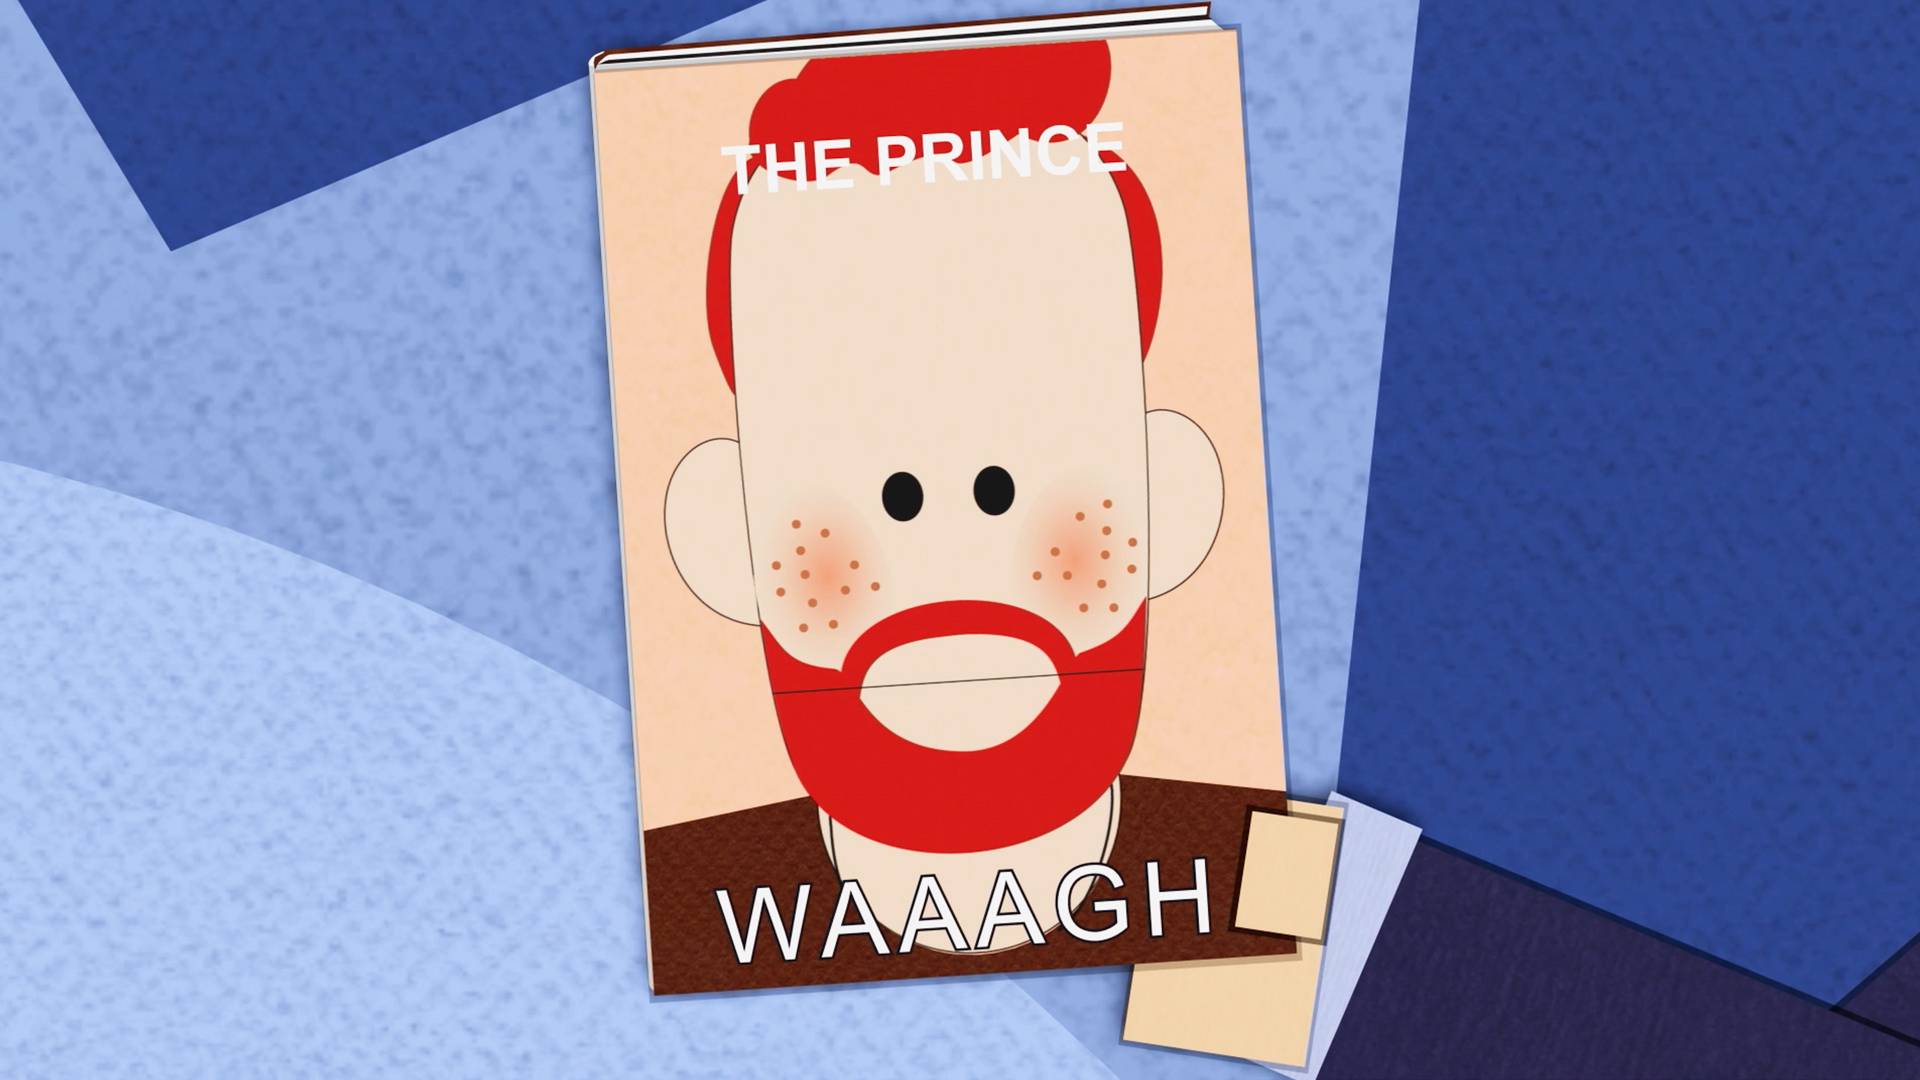 Down with the monarchy! We just want our privacy! #southpark #monarchy, south  park s26 e2